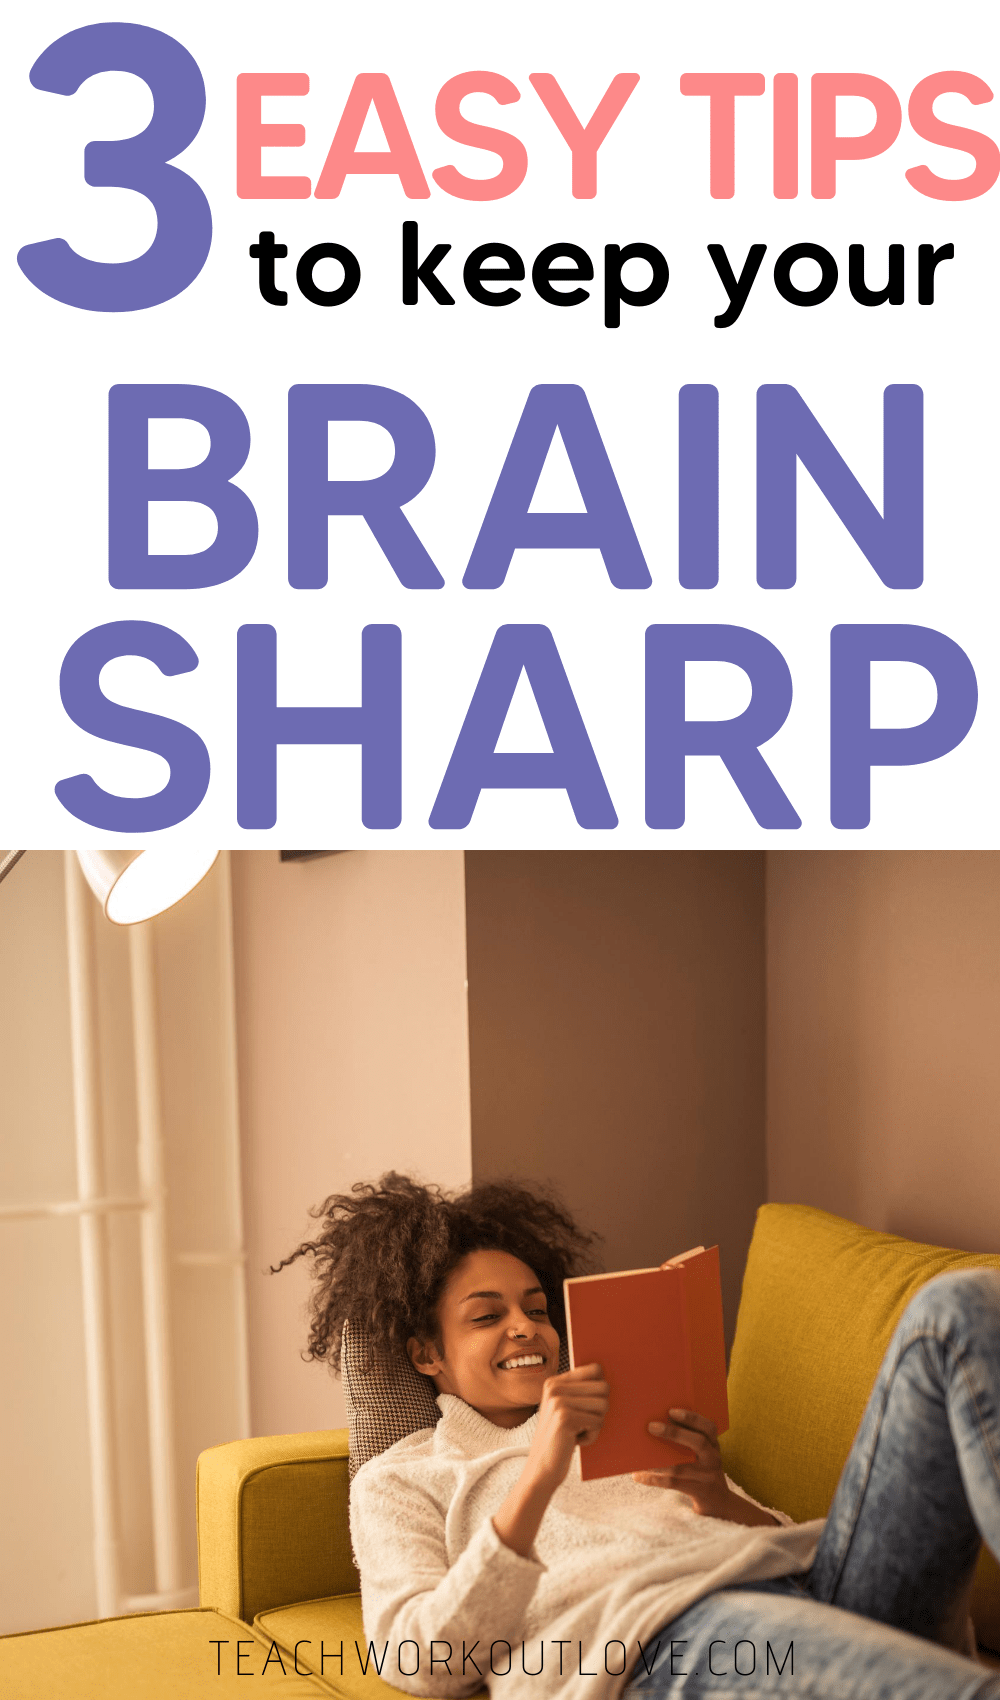 As we get older, our ability to sharply remember information naturally slows down. Take a look at easy ways to keep your brain sharp.